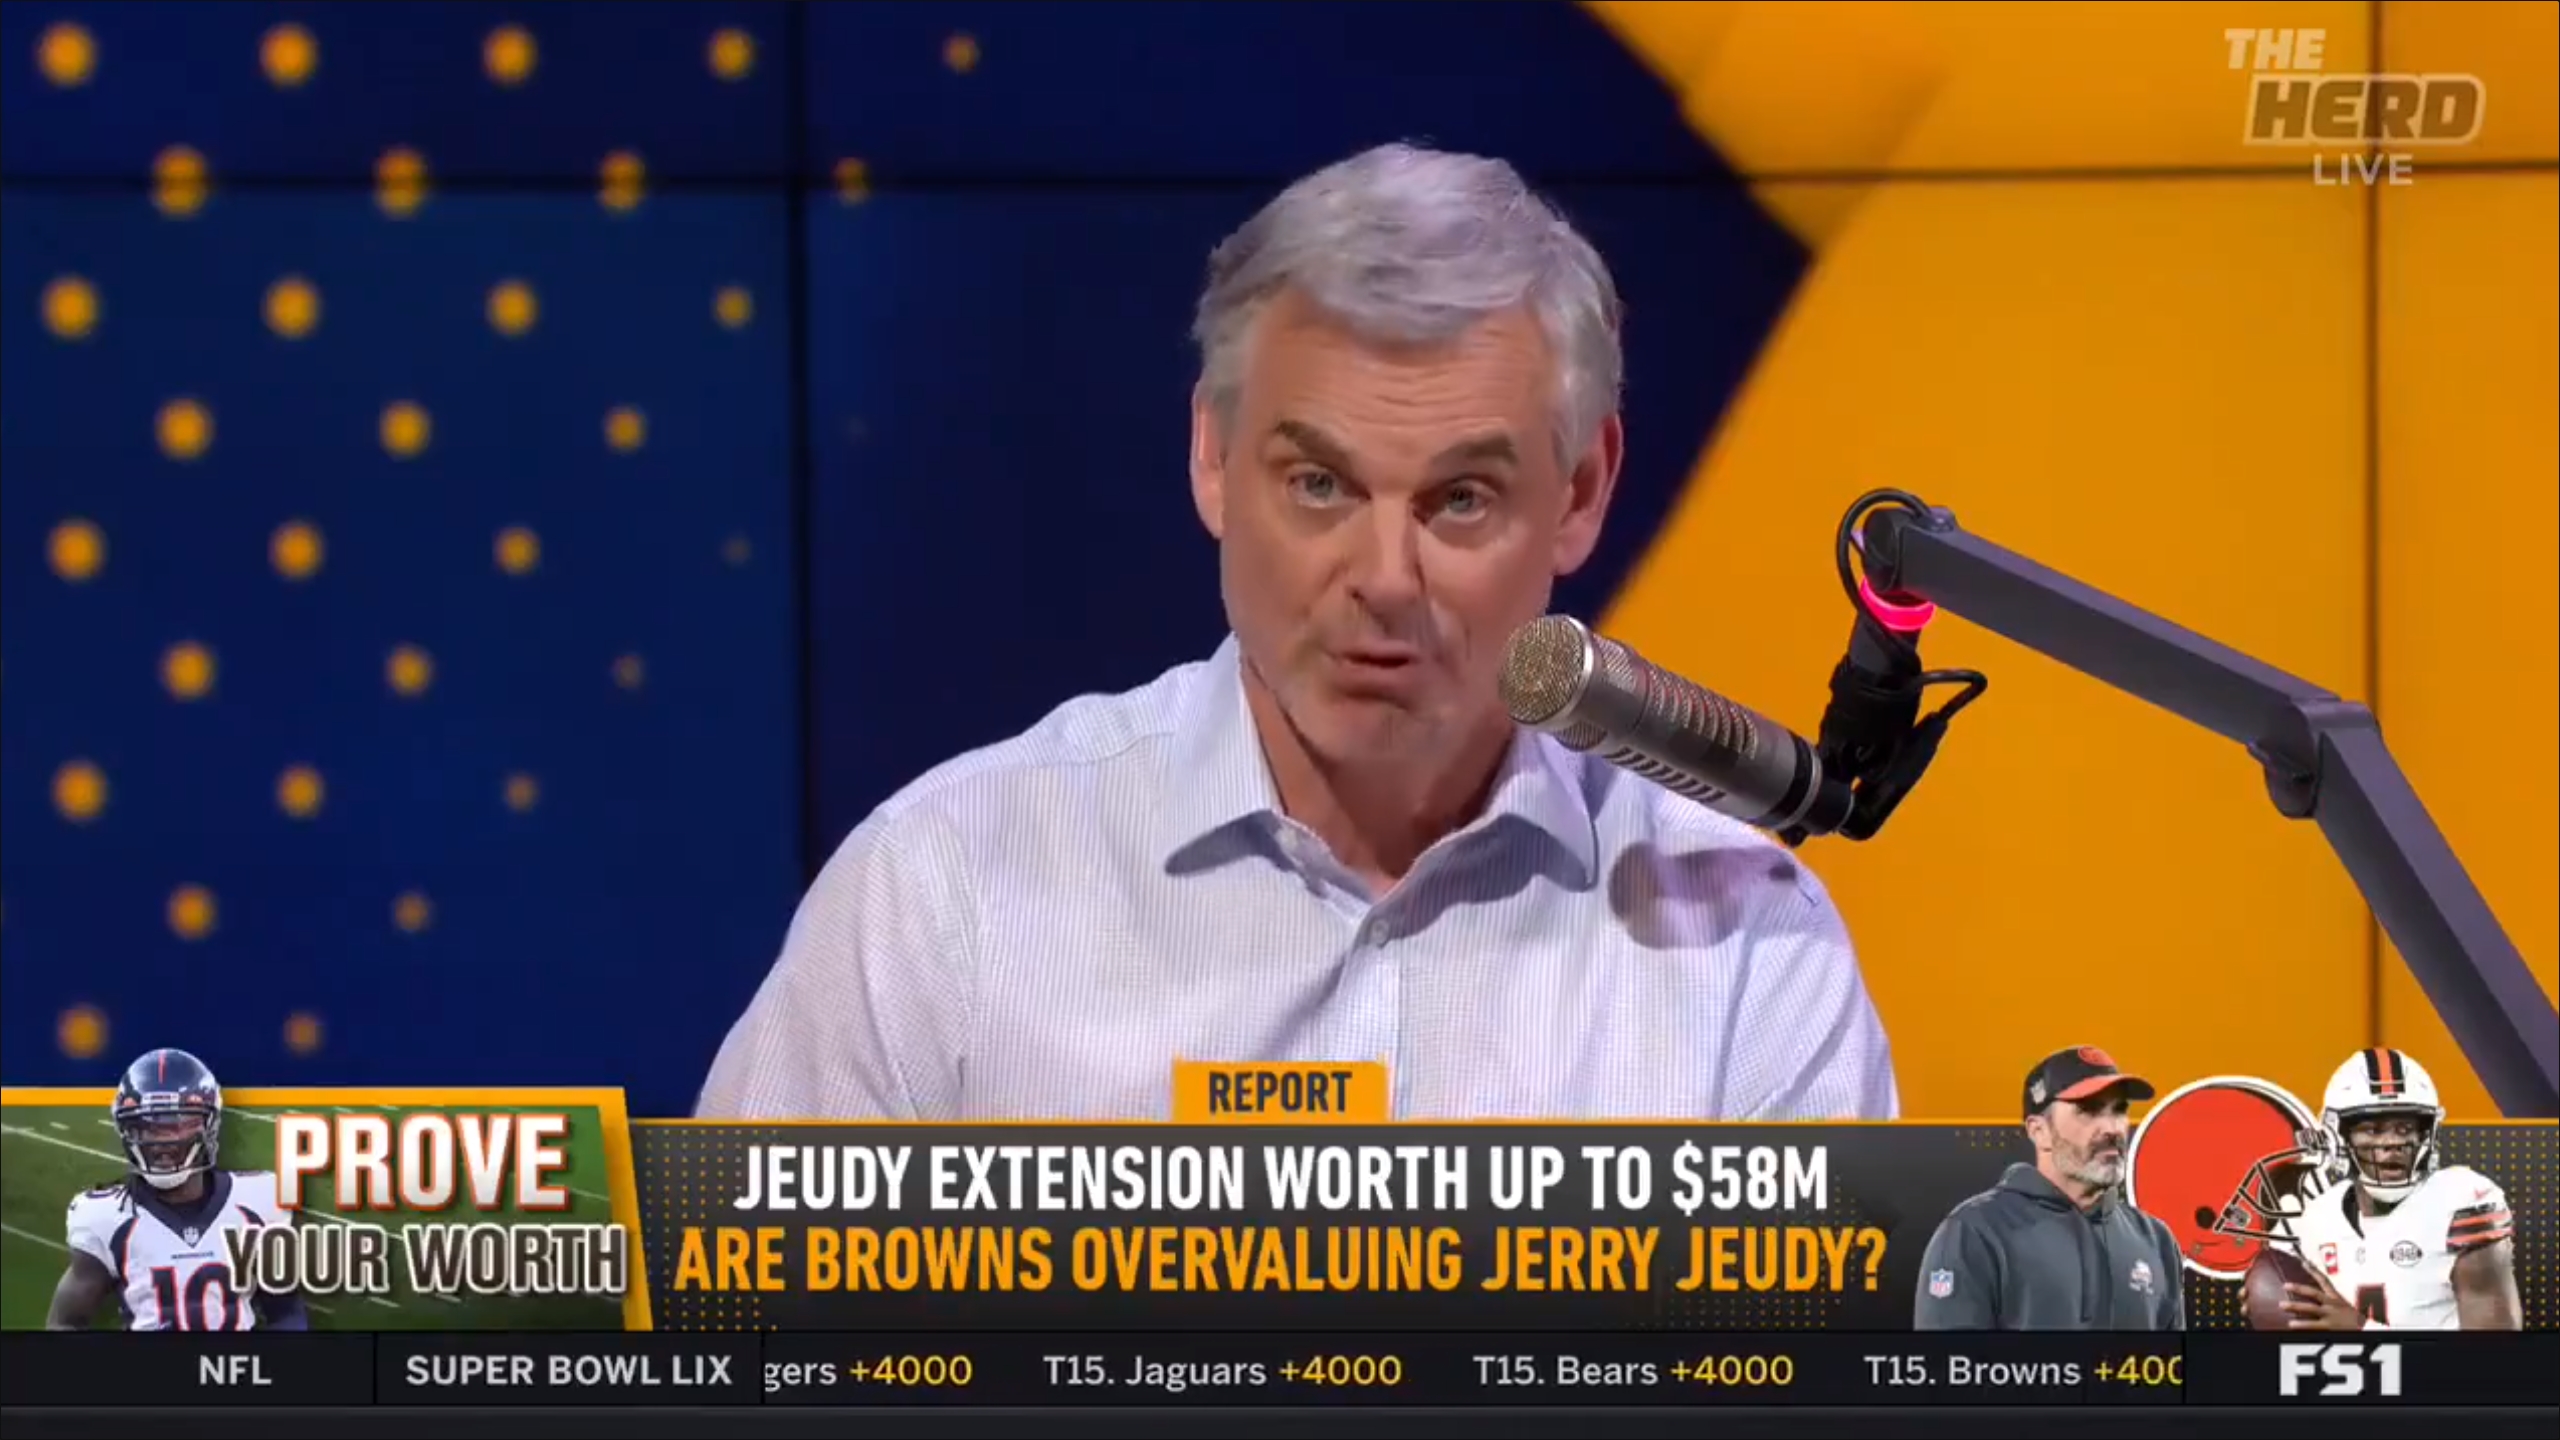 Cowherd called out Young during a discussion about value with players drafted in the NFL